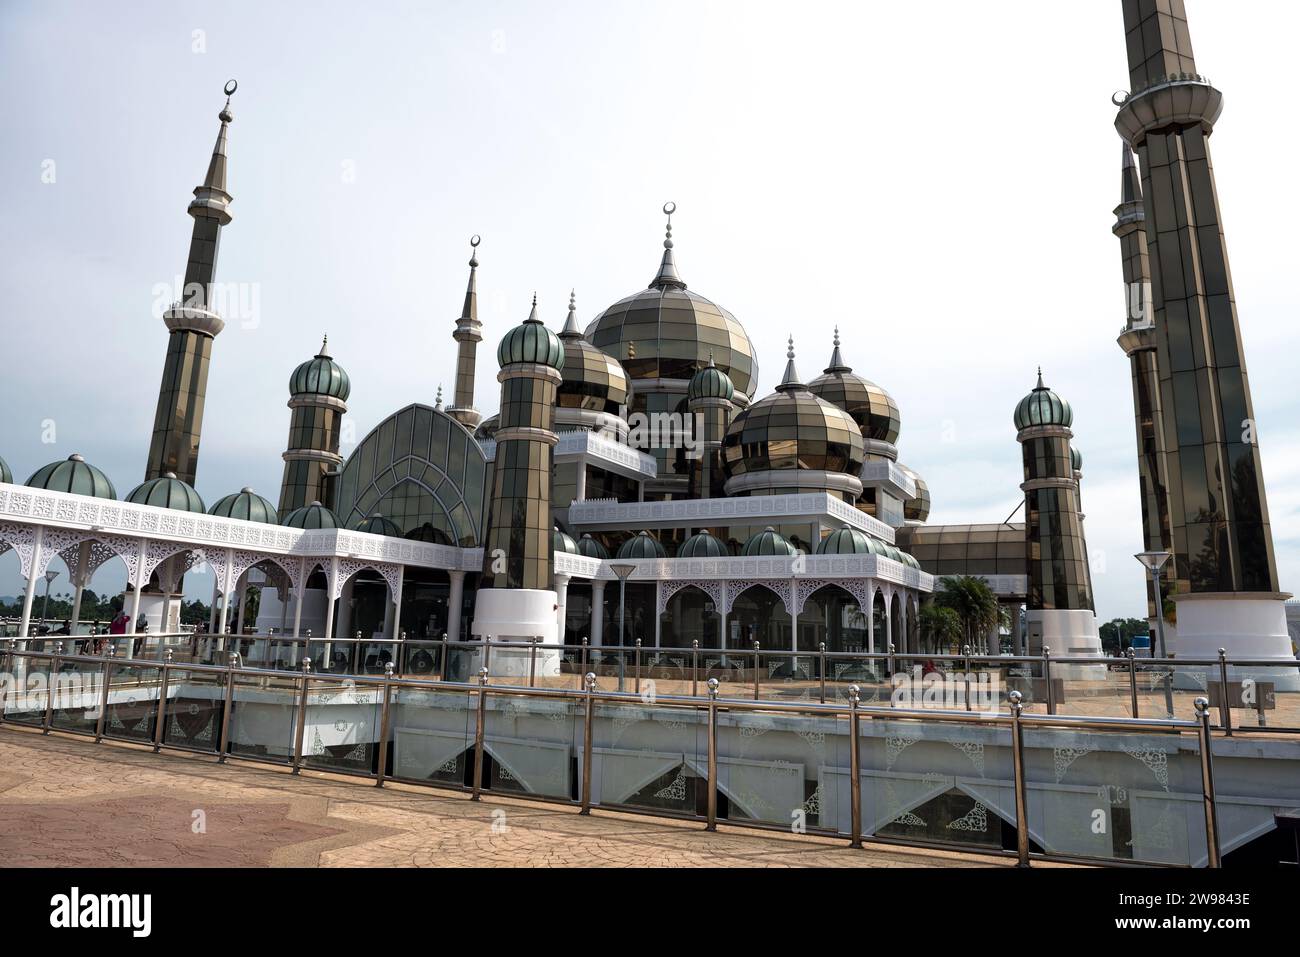 Crystal Mosque, Terengganu, Malaysia - A grand structure made of steel, glass and crystal. The mosque is located at Islamic Heritage Park on the islan Stock Photo